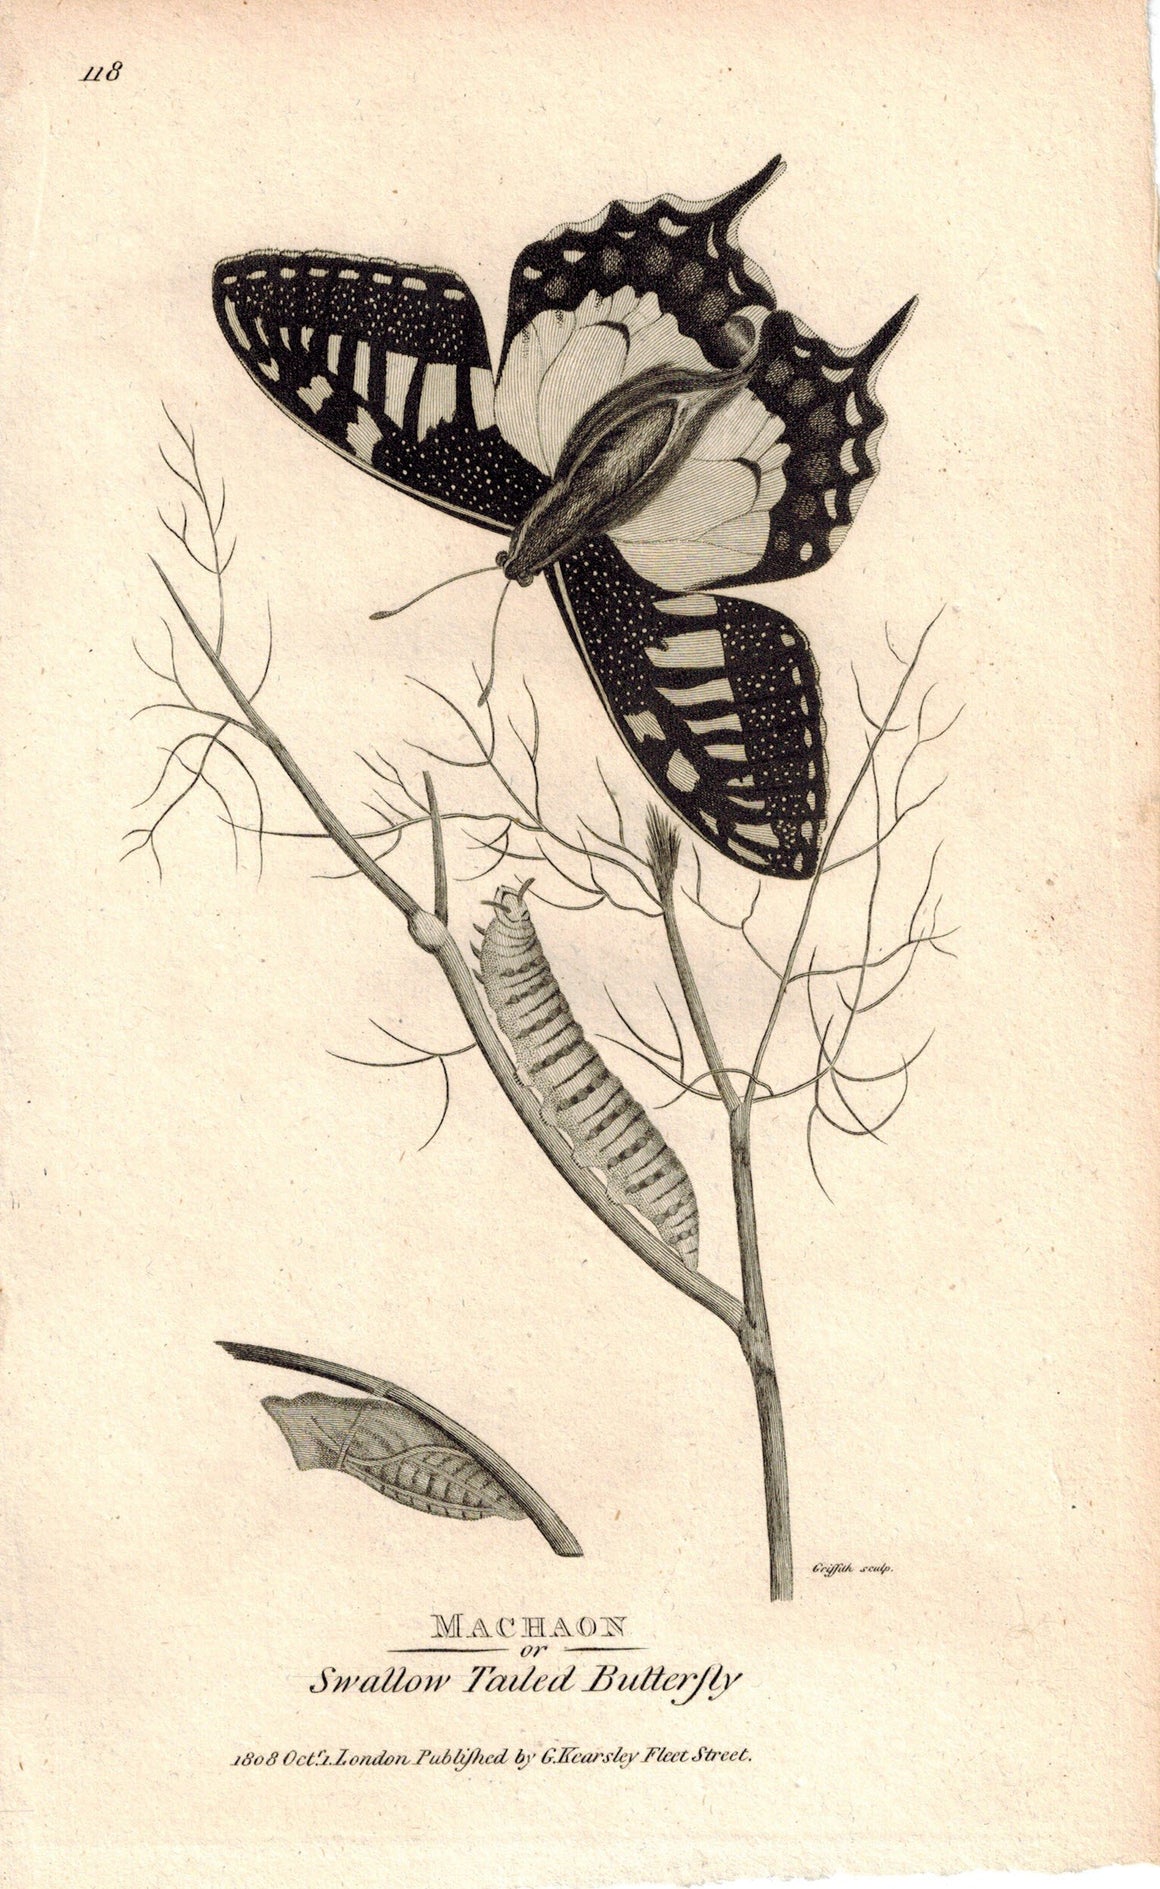 Machaon Swallow Tailed Butterfly 1809 Engraving Print by Shaw & Griffith